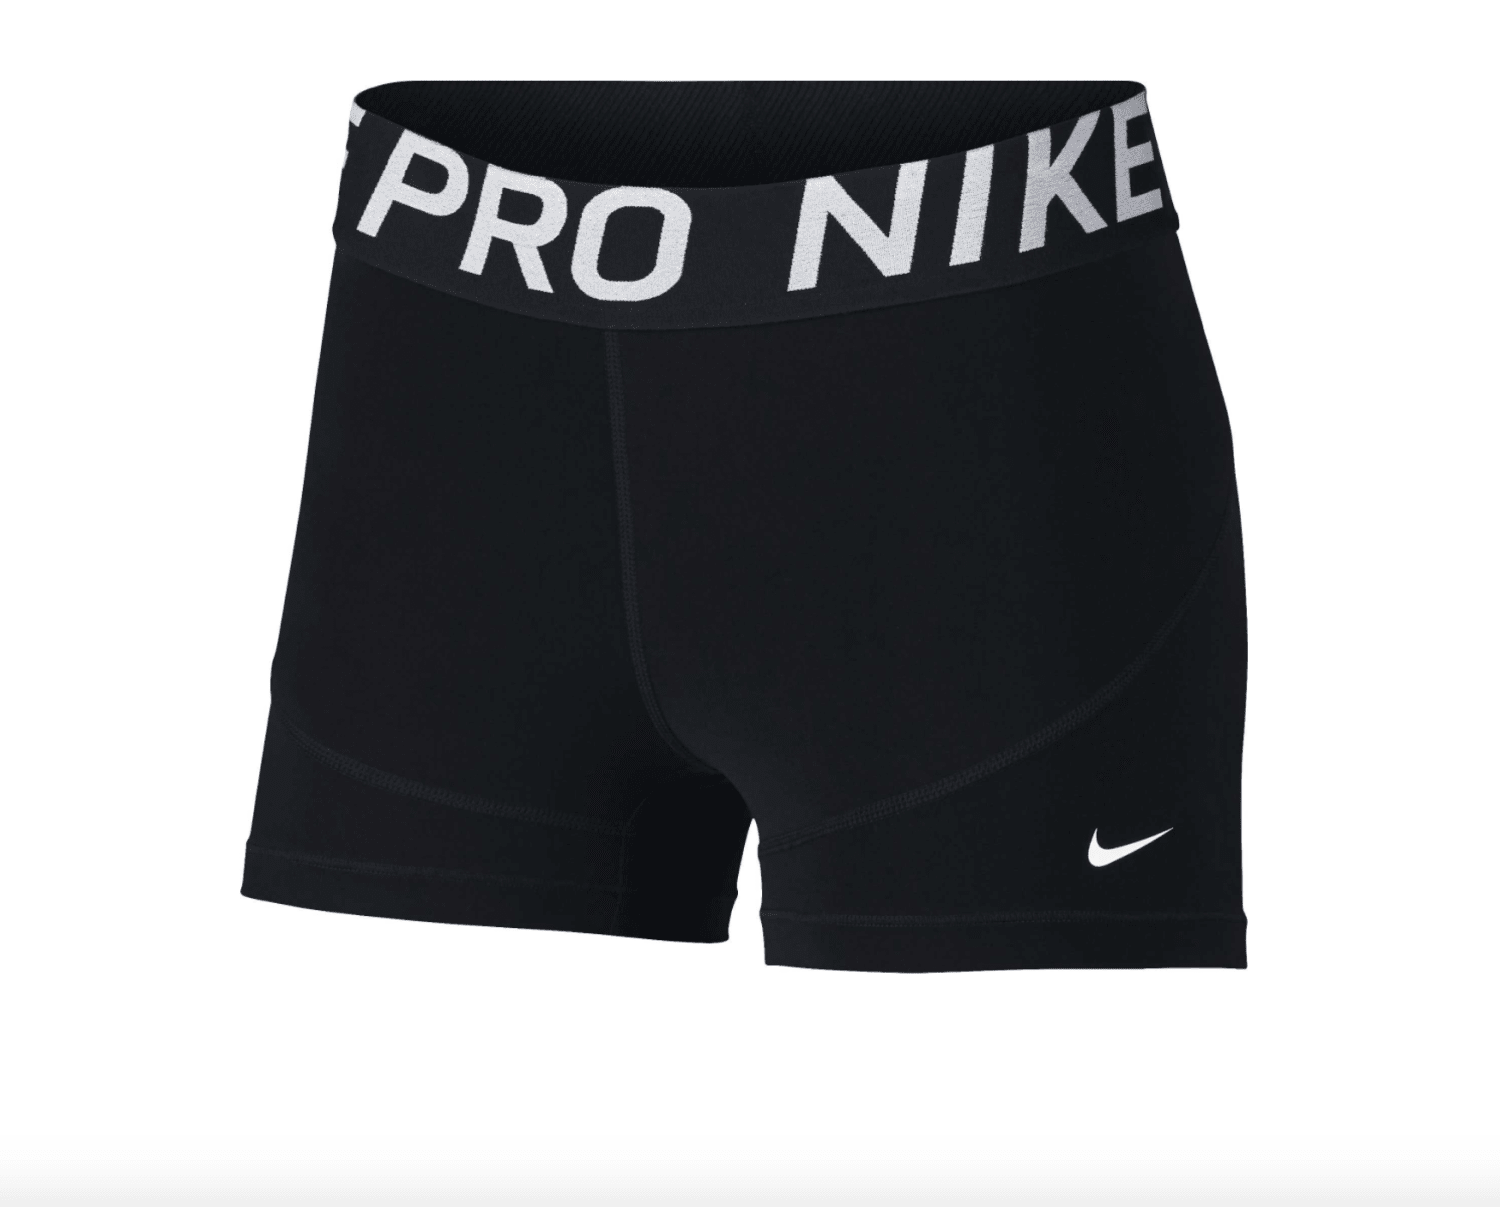 Deadlock broken Manage The Nike Pro Shorts are versatile and extremely comfortable